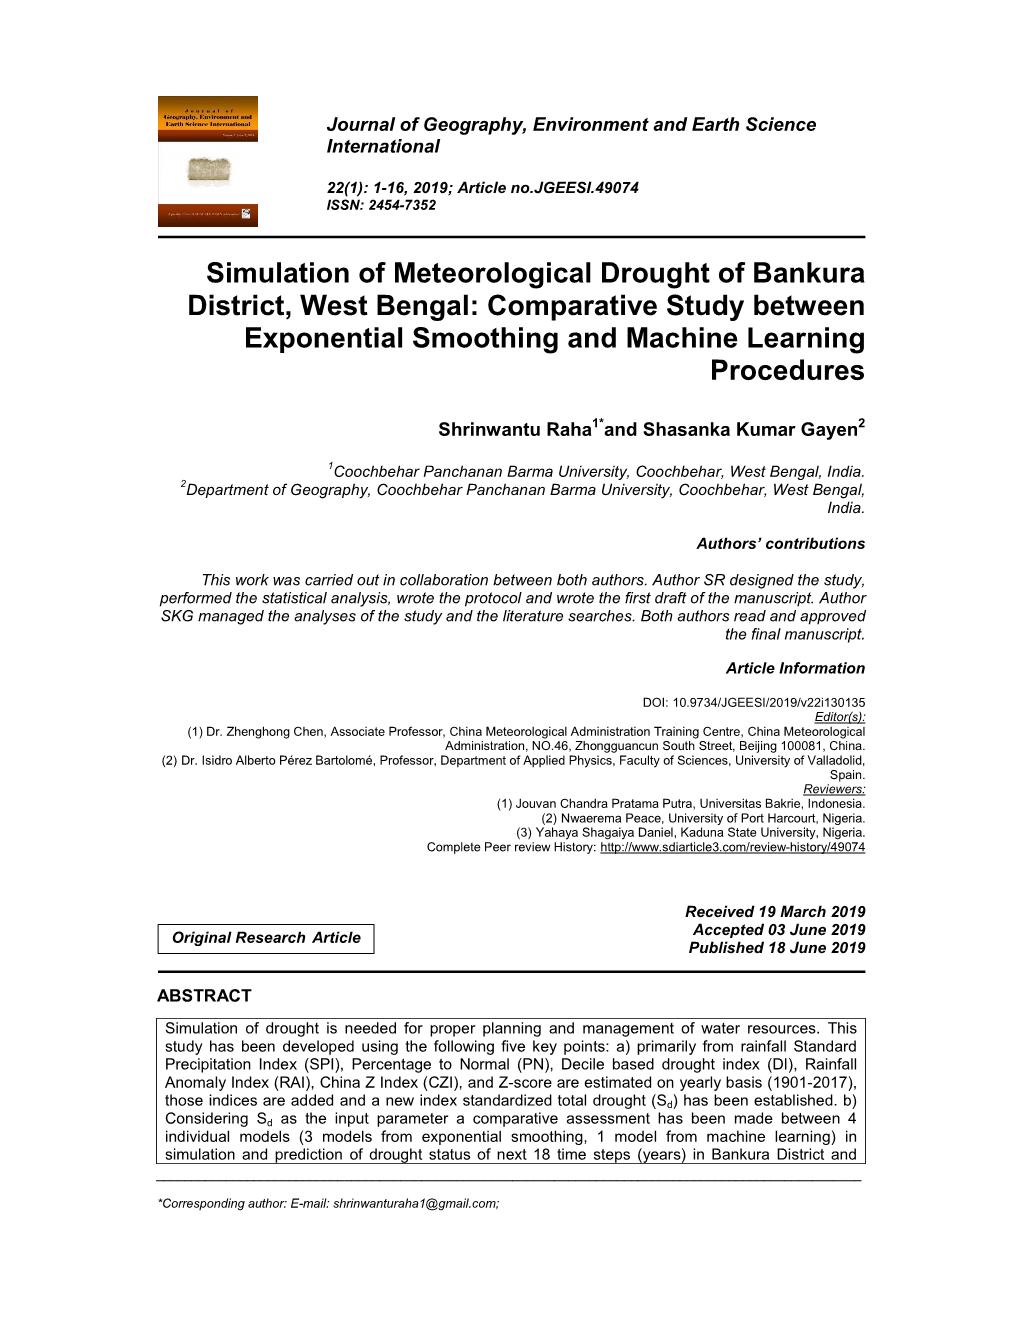 Simulation of Meteorological Drought of Bankura District, West Bengal: Comparative Study Between Exponential Smoothing and Machine Learning Procedures